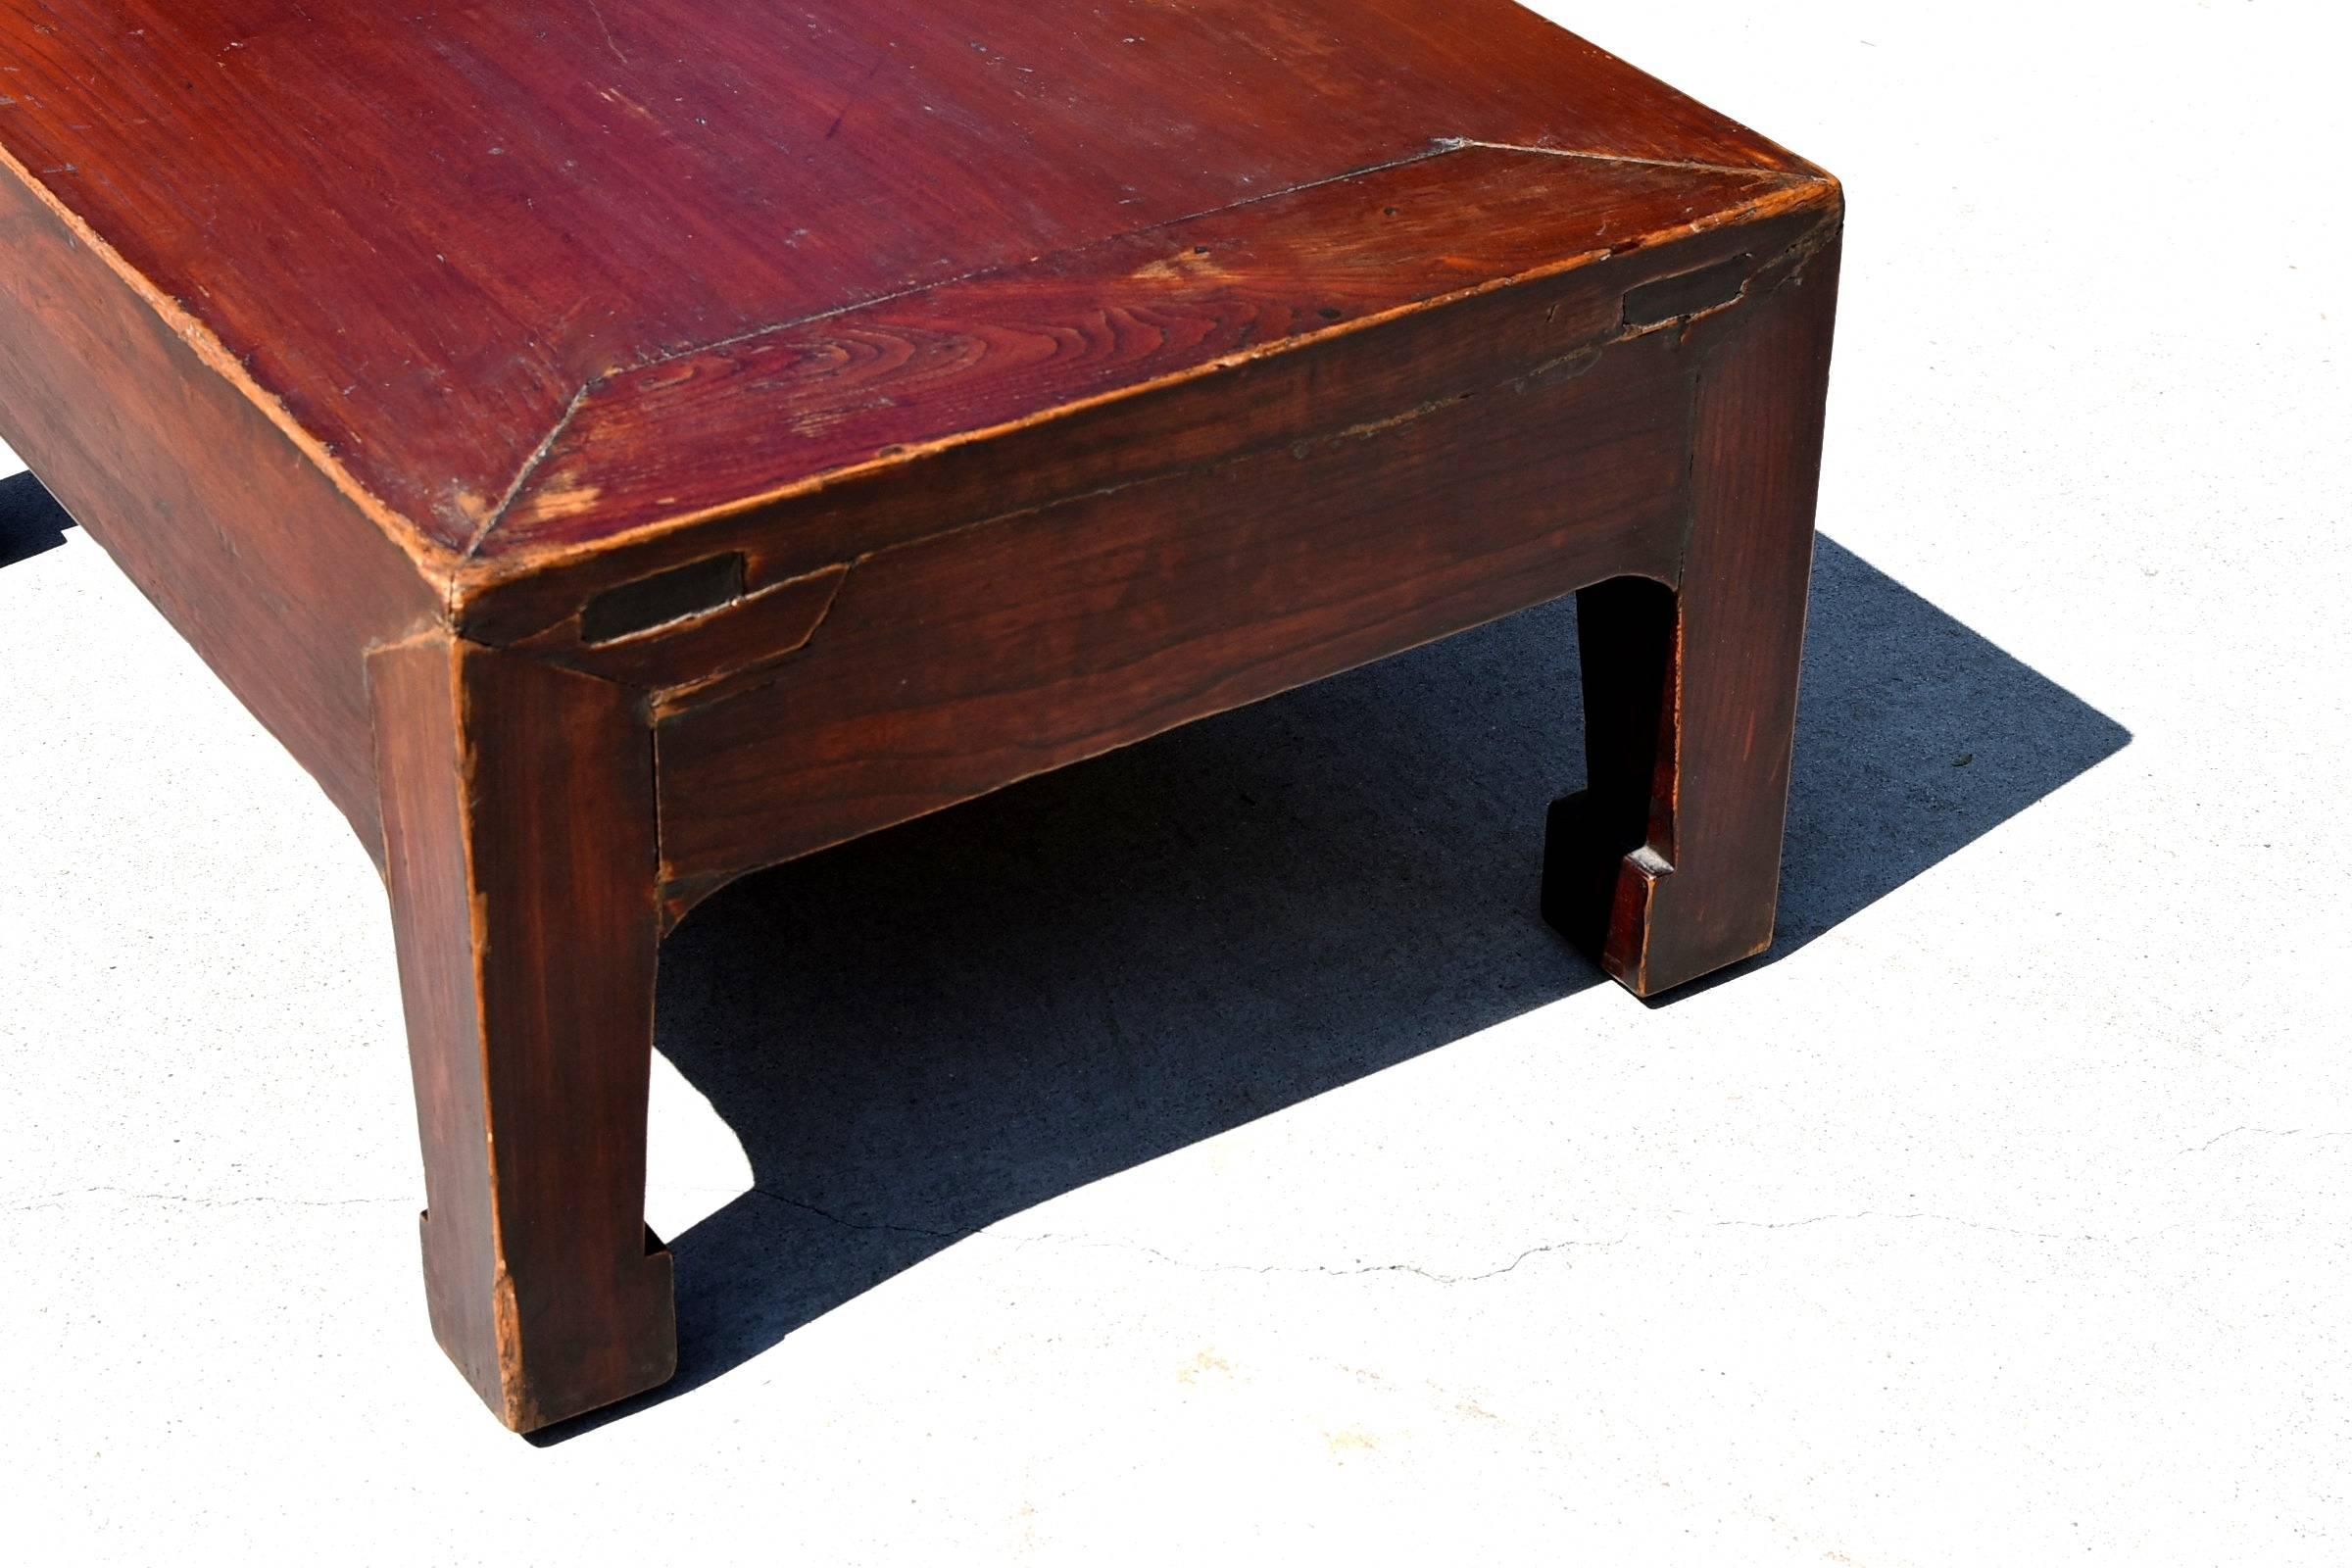 Wood Antique Low Table